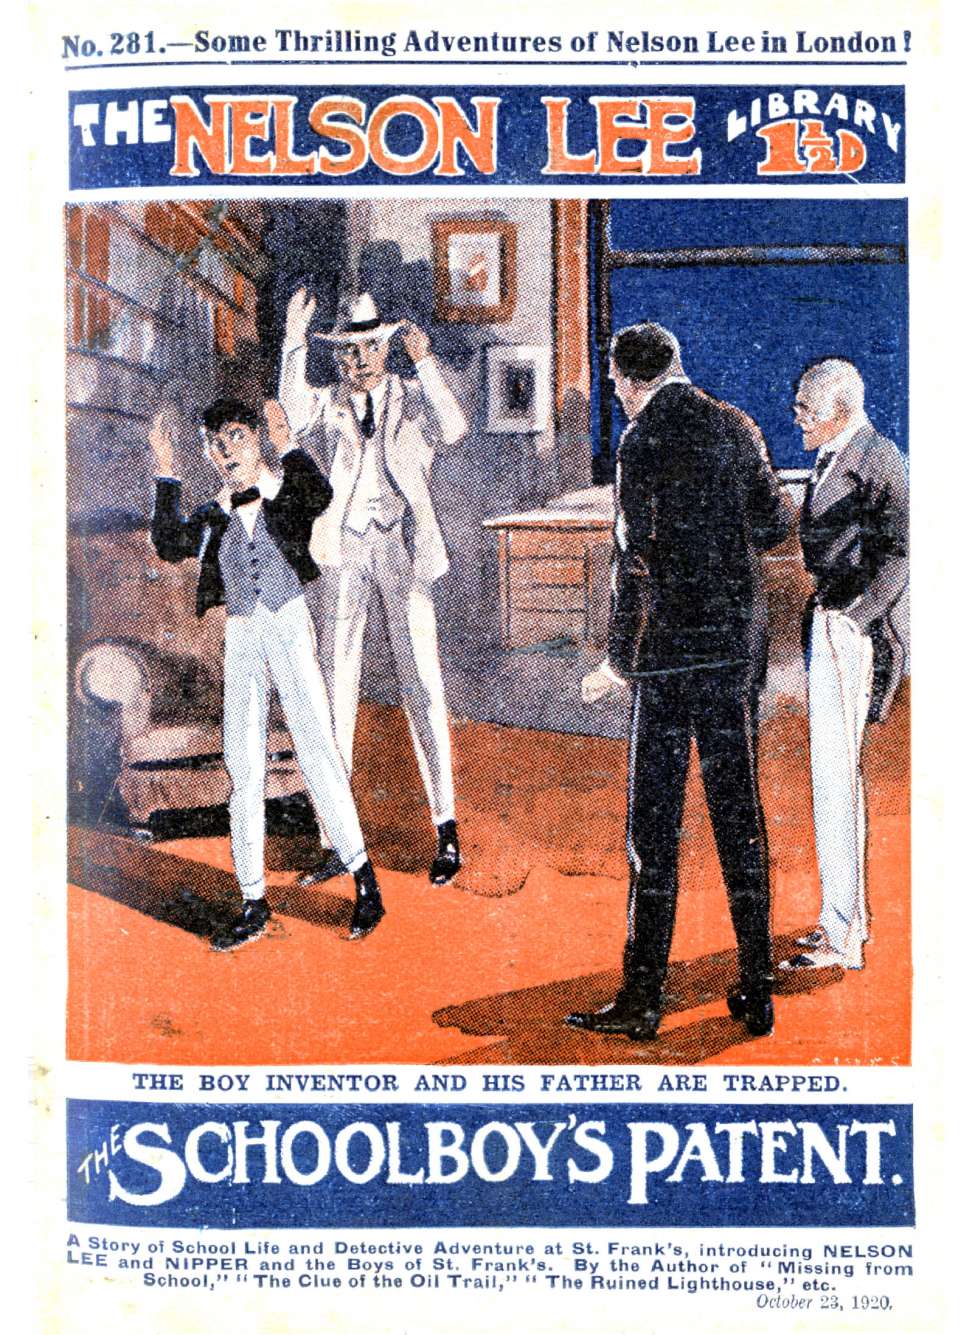 Book Cover For Nelson Lee Library s1 281 - The Schoolboy's Patent